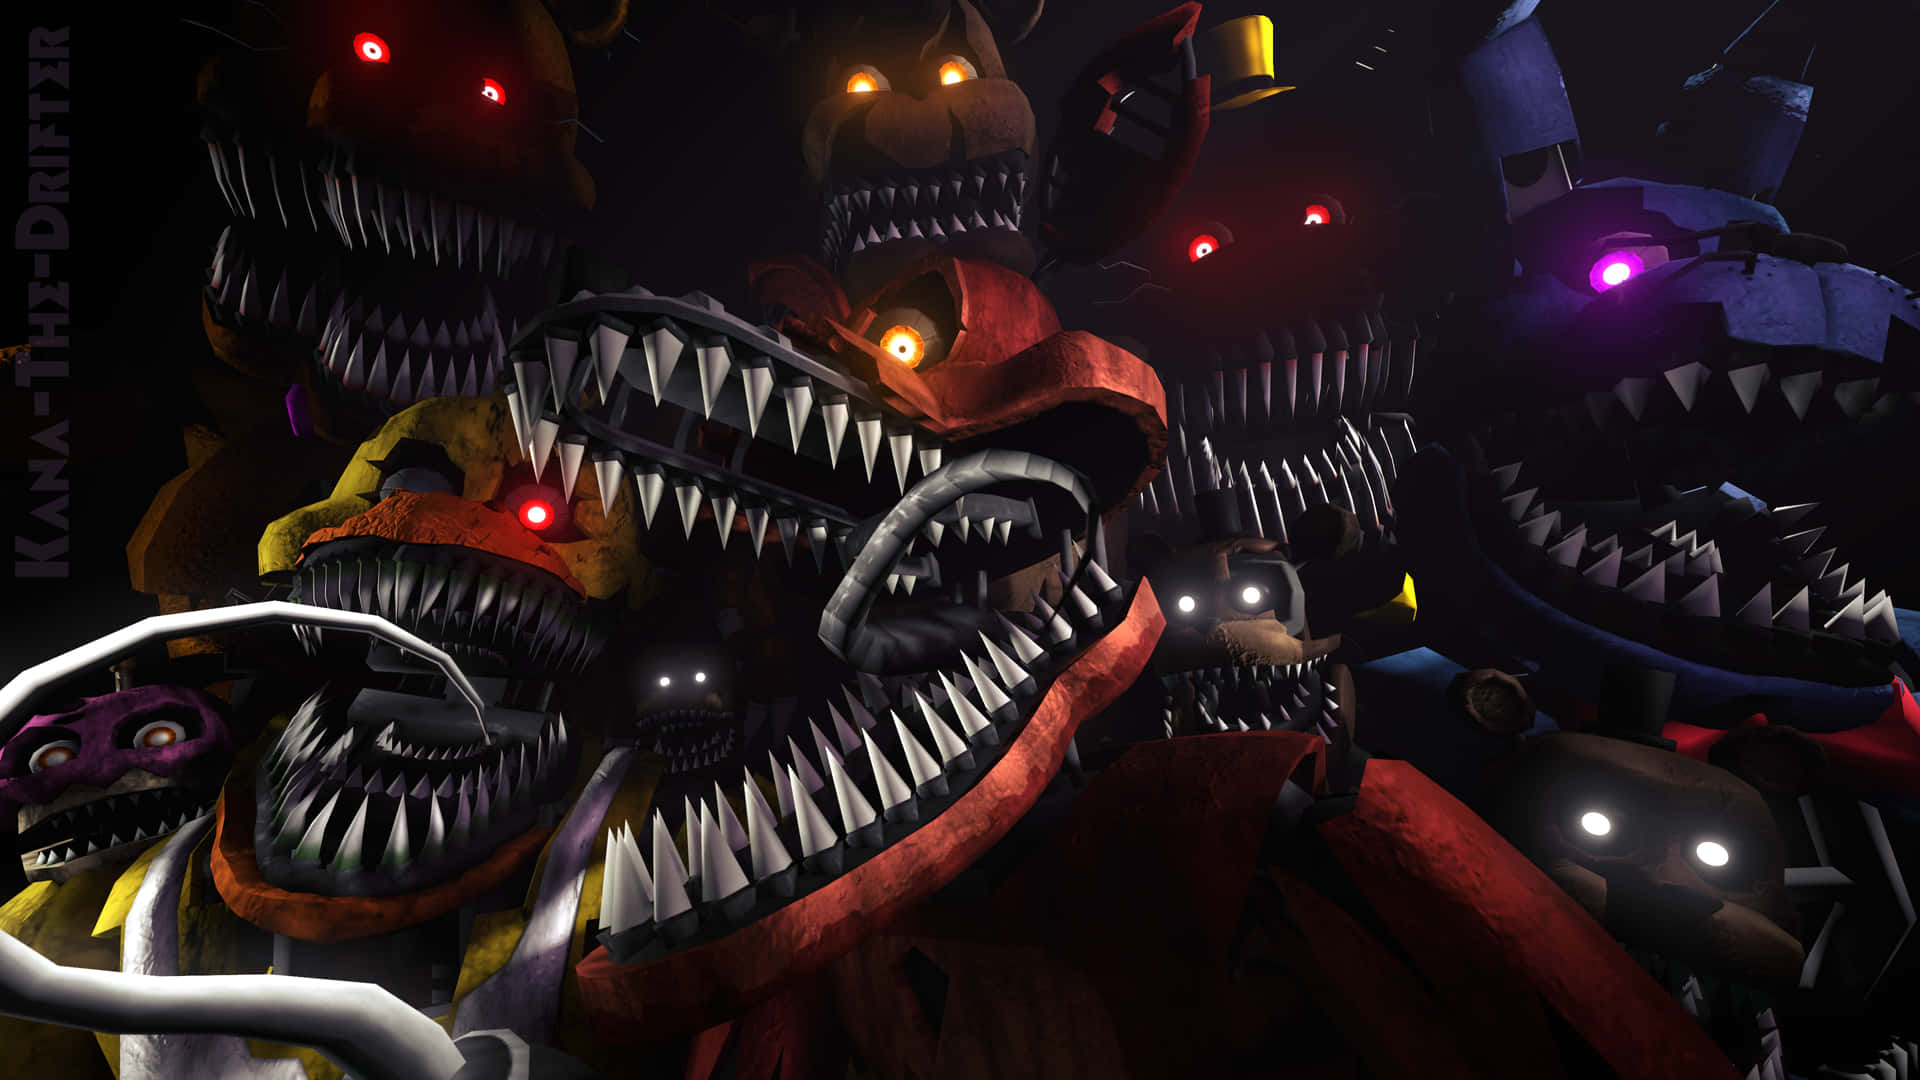 Wallpapers for Five Night's At Freddy's Edition - Backgrounds for